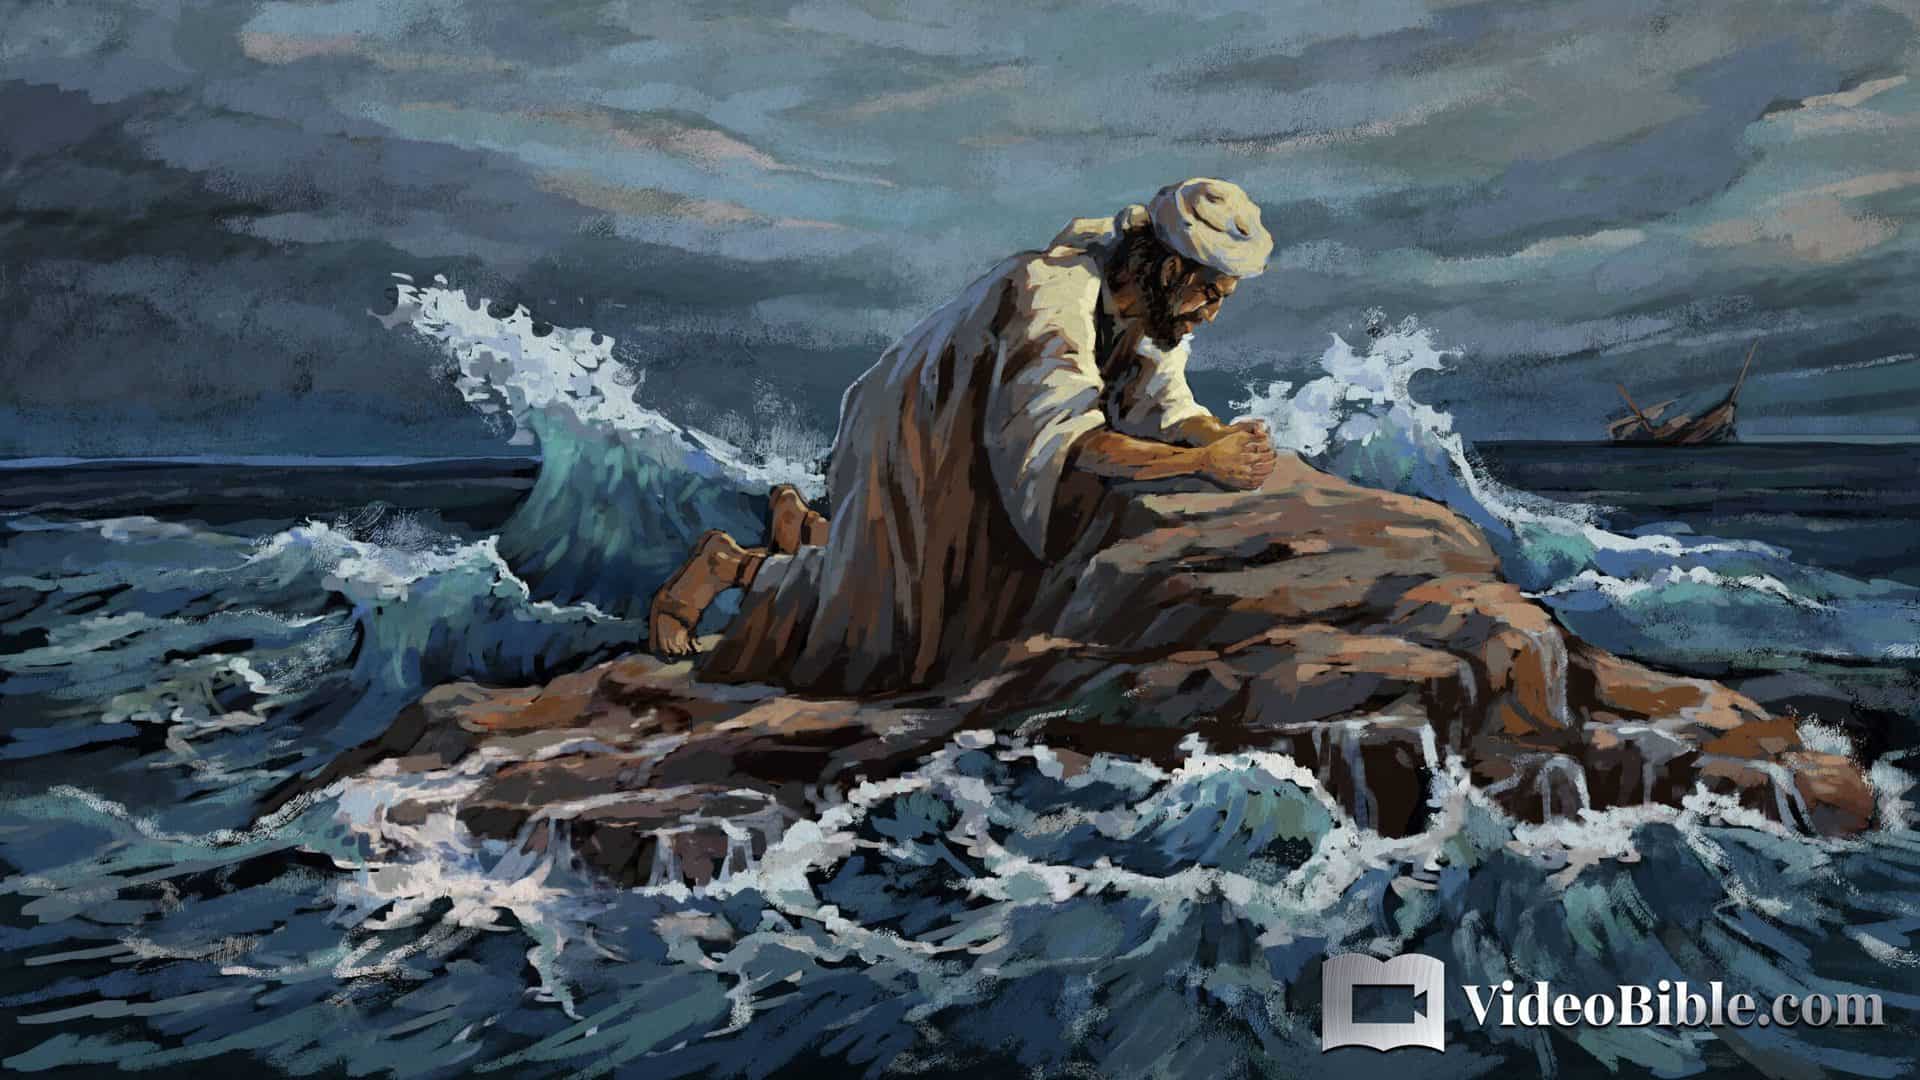 man praying on the rock of God in the ocean with waves crashing